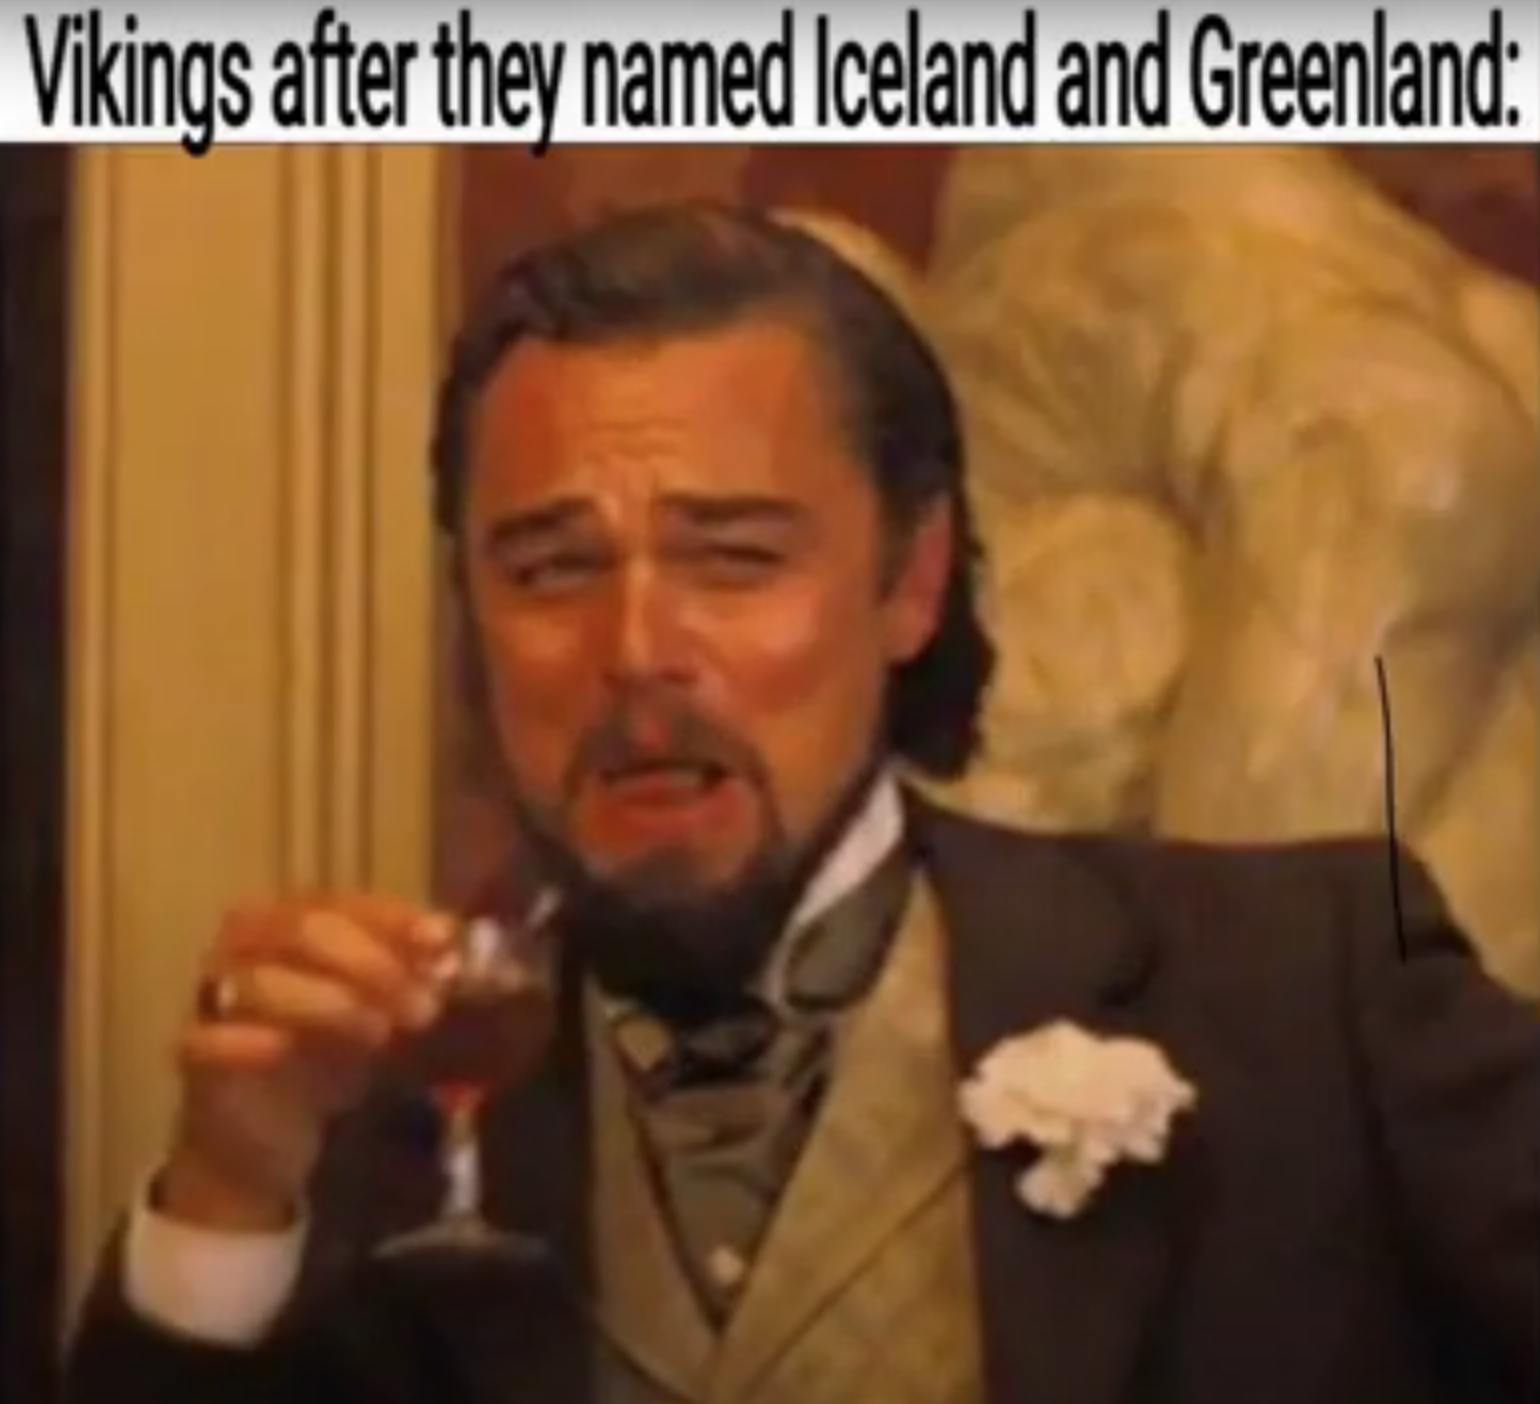 leonardo dicaprio laughing memes - leonardo dicaprio monster drink - Vikings after they named Iceland and Greenland